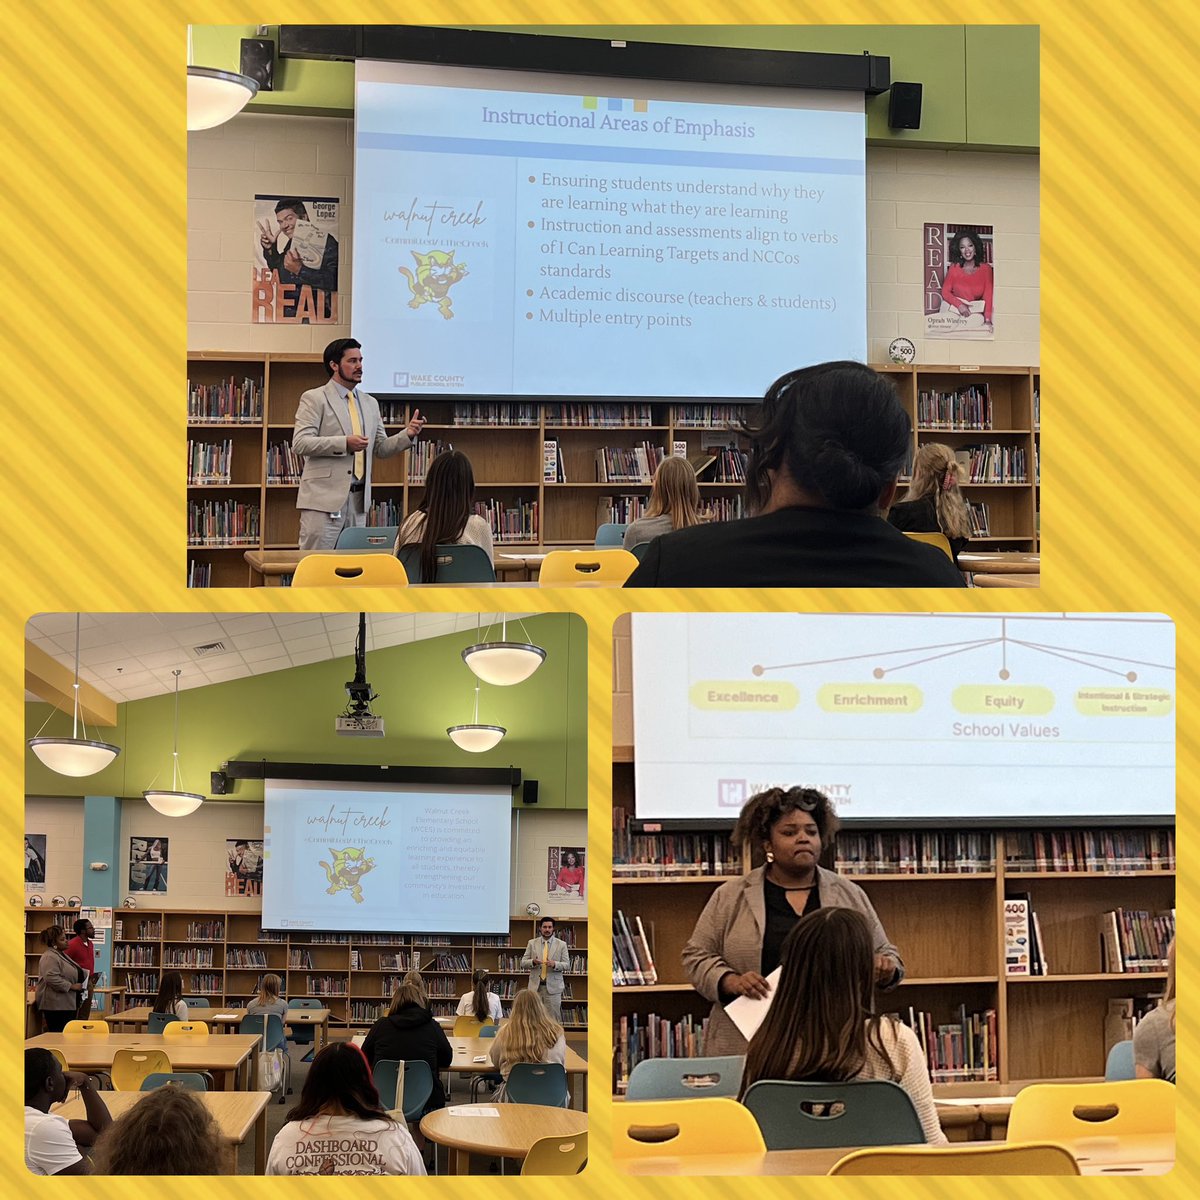 Fortunate to be present when this admin dream team shared their story with @WCPSSfuturetchr highlighting their mission, vision, & instructional areas of emphasis before visiting classrooms💛🖤@WalnutCreekES #CommittedAtTheCreek #TheCreekIsRising